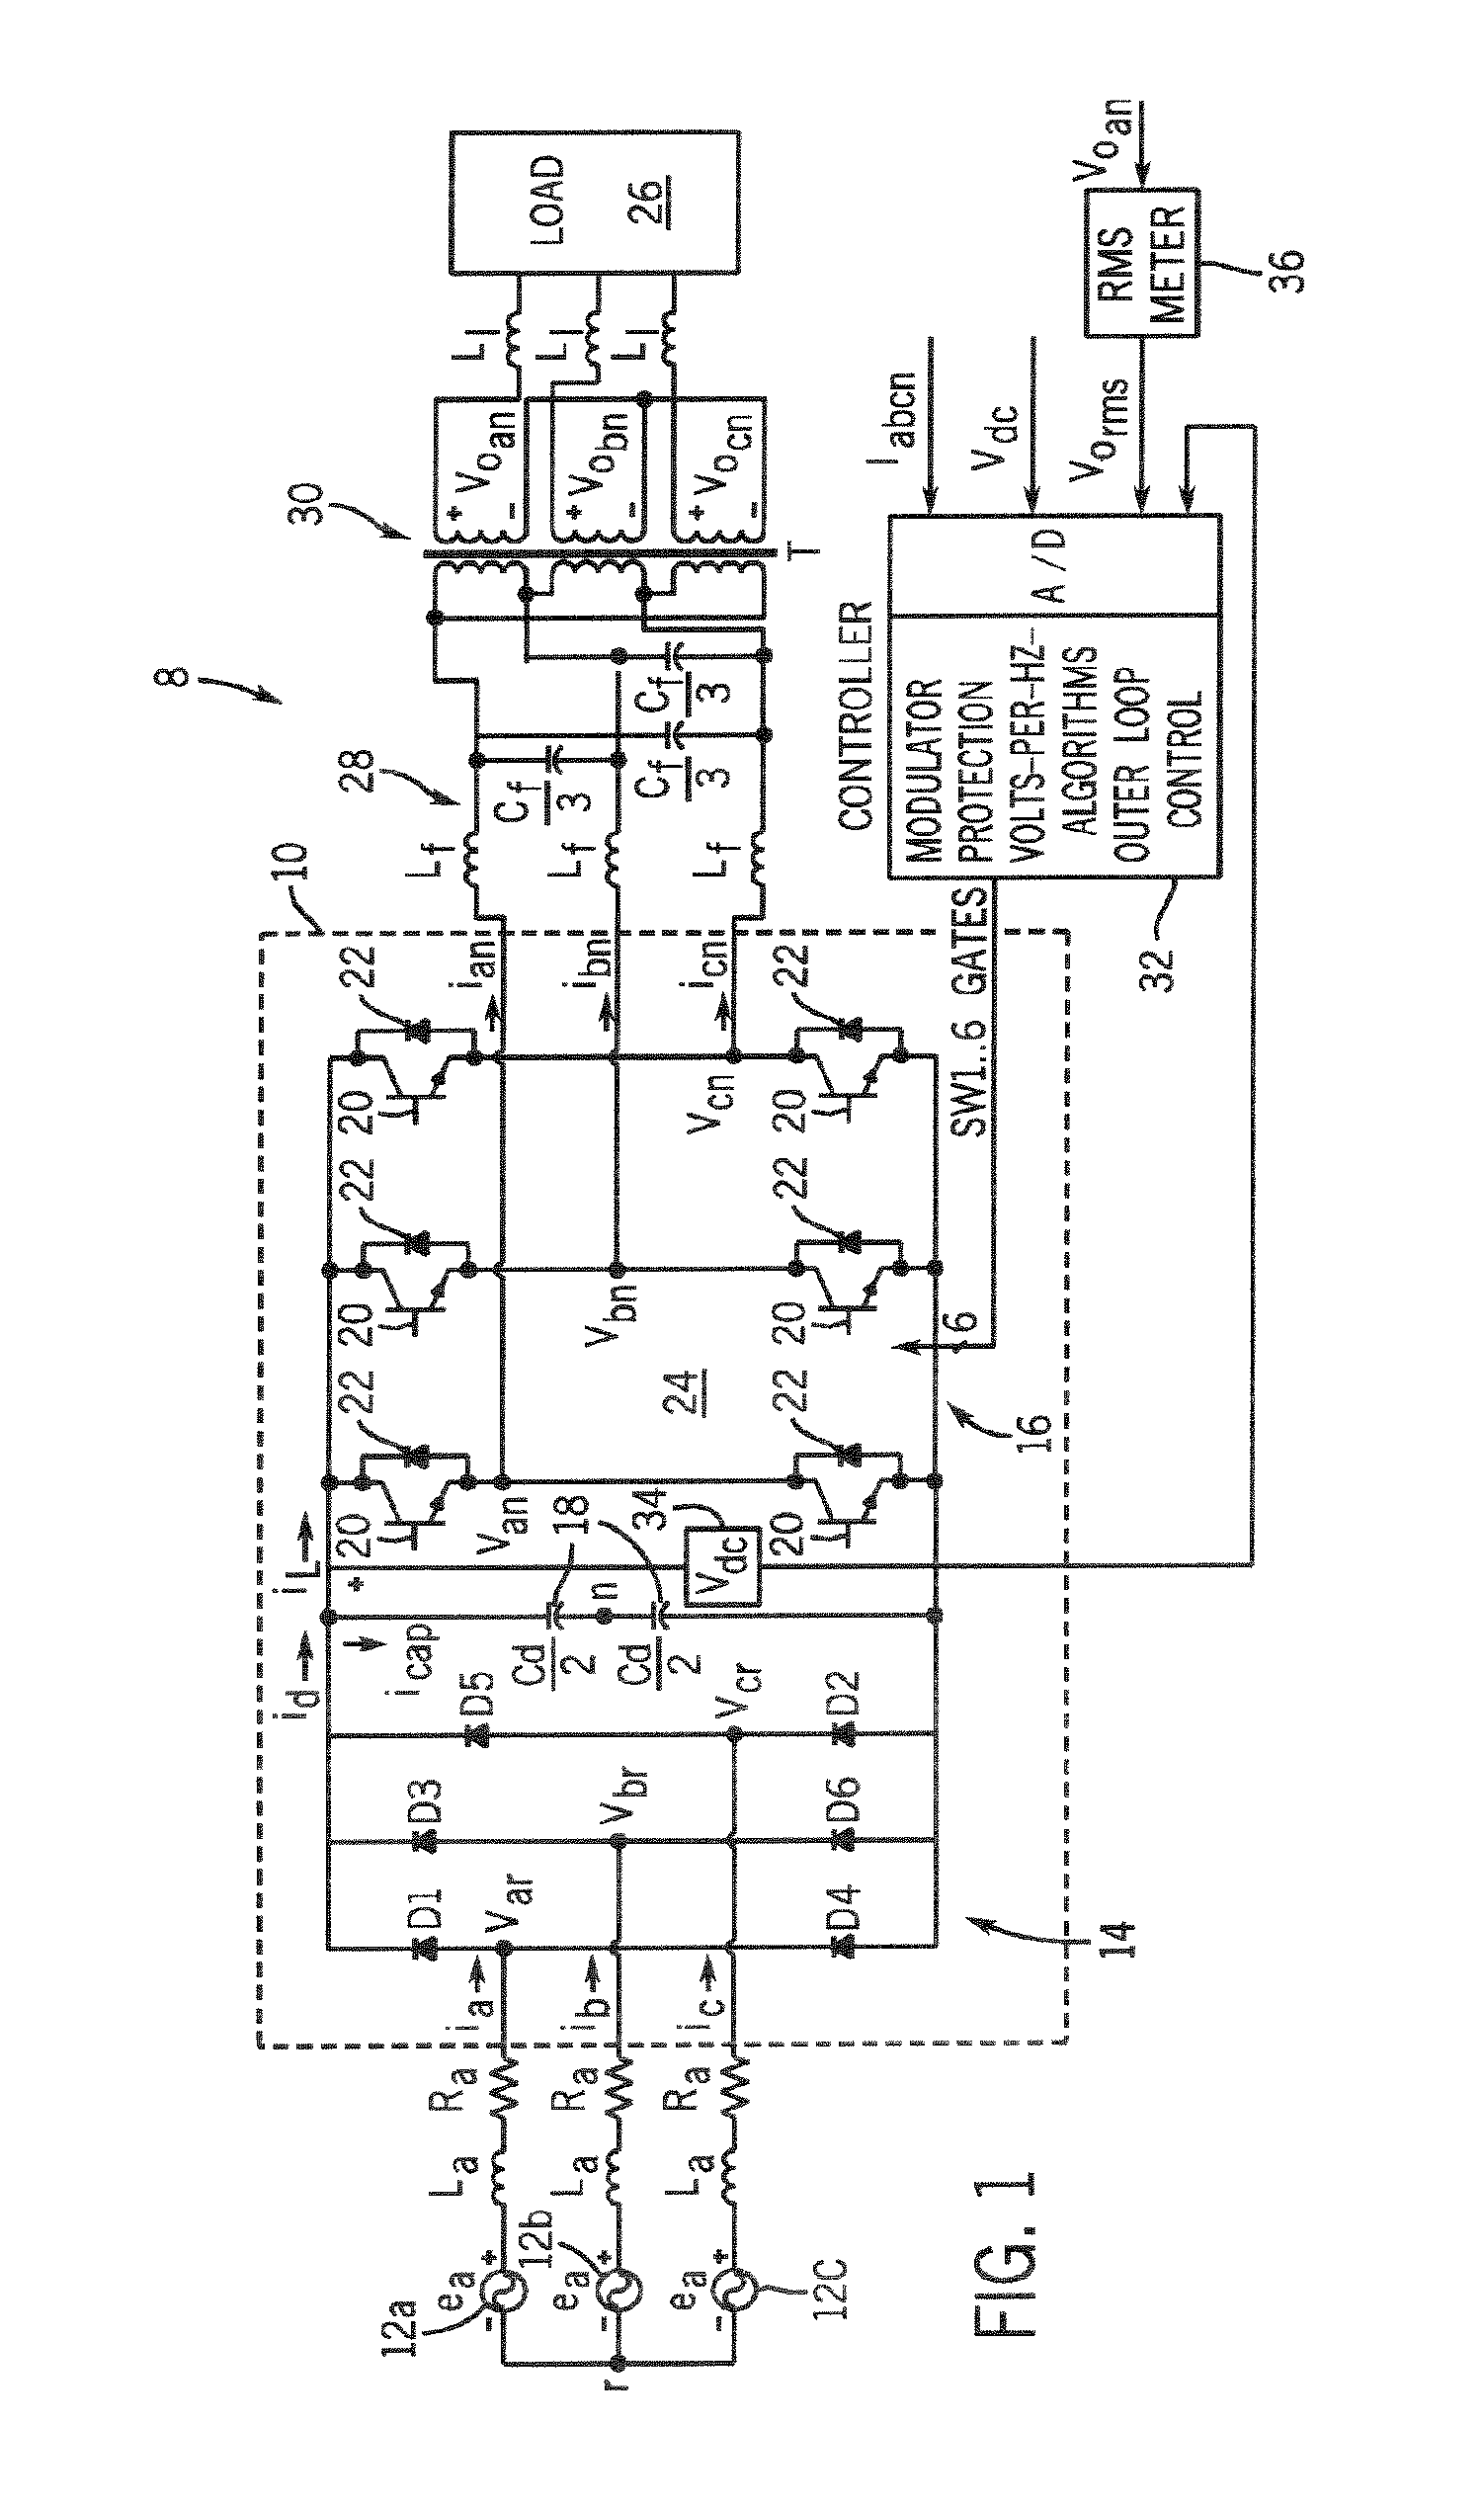 System and method of controlling the start-up of an adjustable speed motor drive based sinusoidal output power conditioner